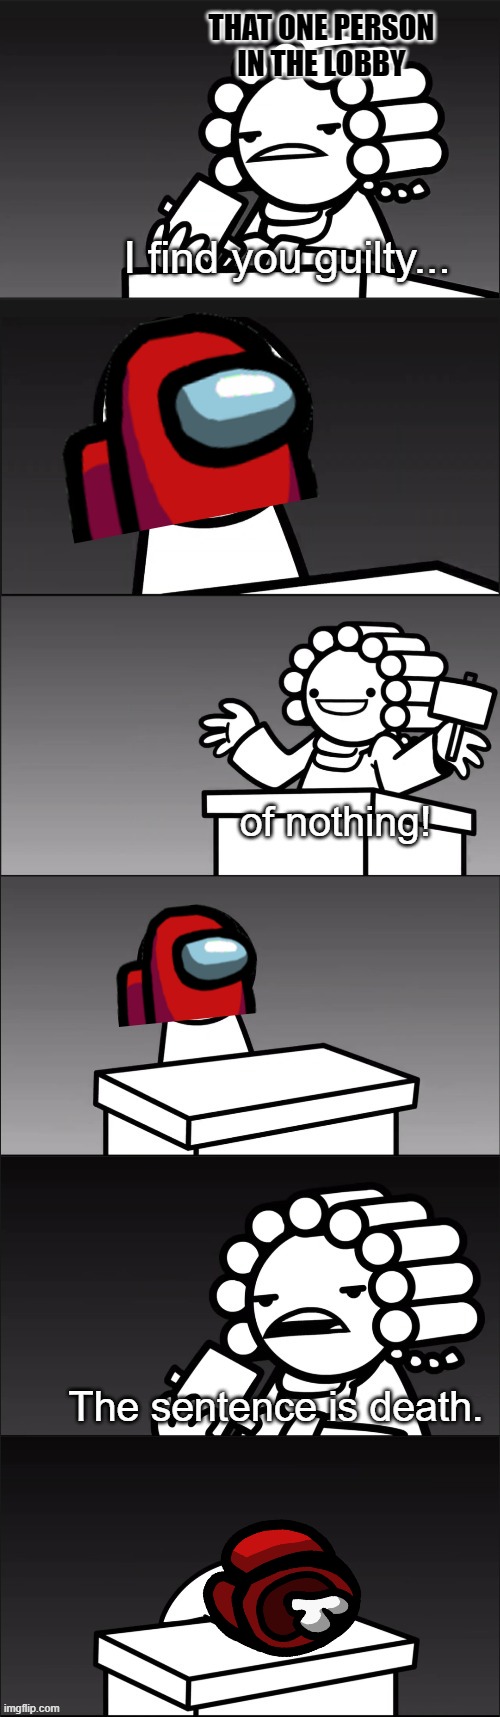 Enough with the "red sus" thing already!!! | THAT ONE PERSON IN THE LOBBY | image tagged in memes,asdfmovie i find you guilty,among us,red sus,asdfmovie | made w/ Imgflip meme maker